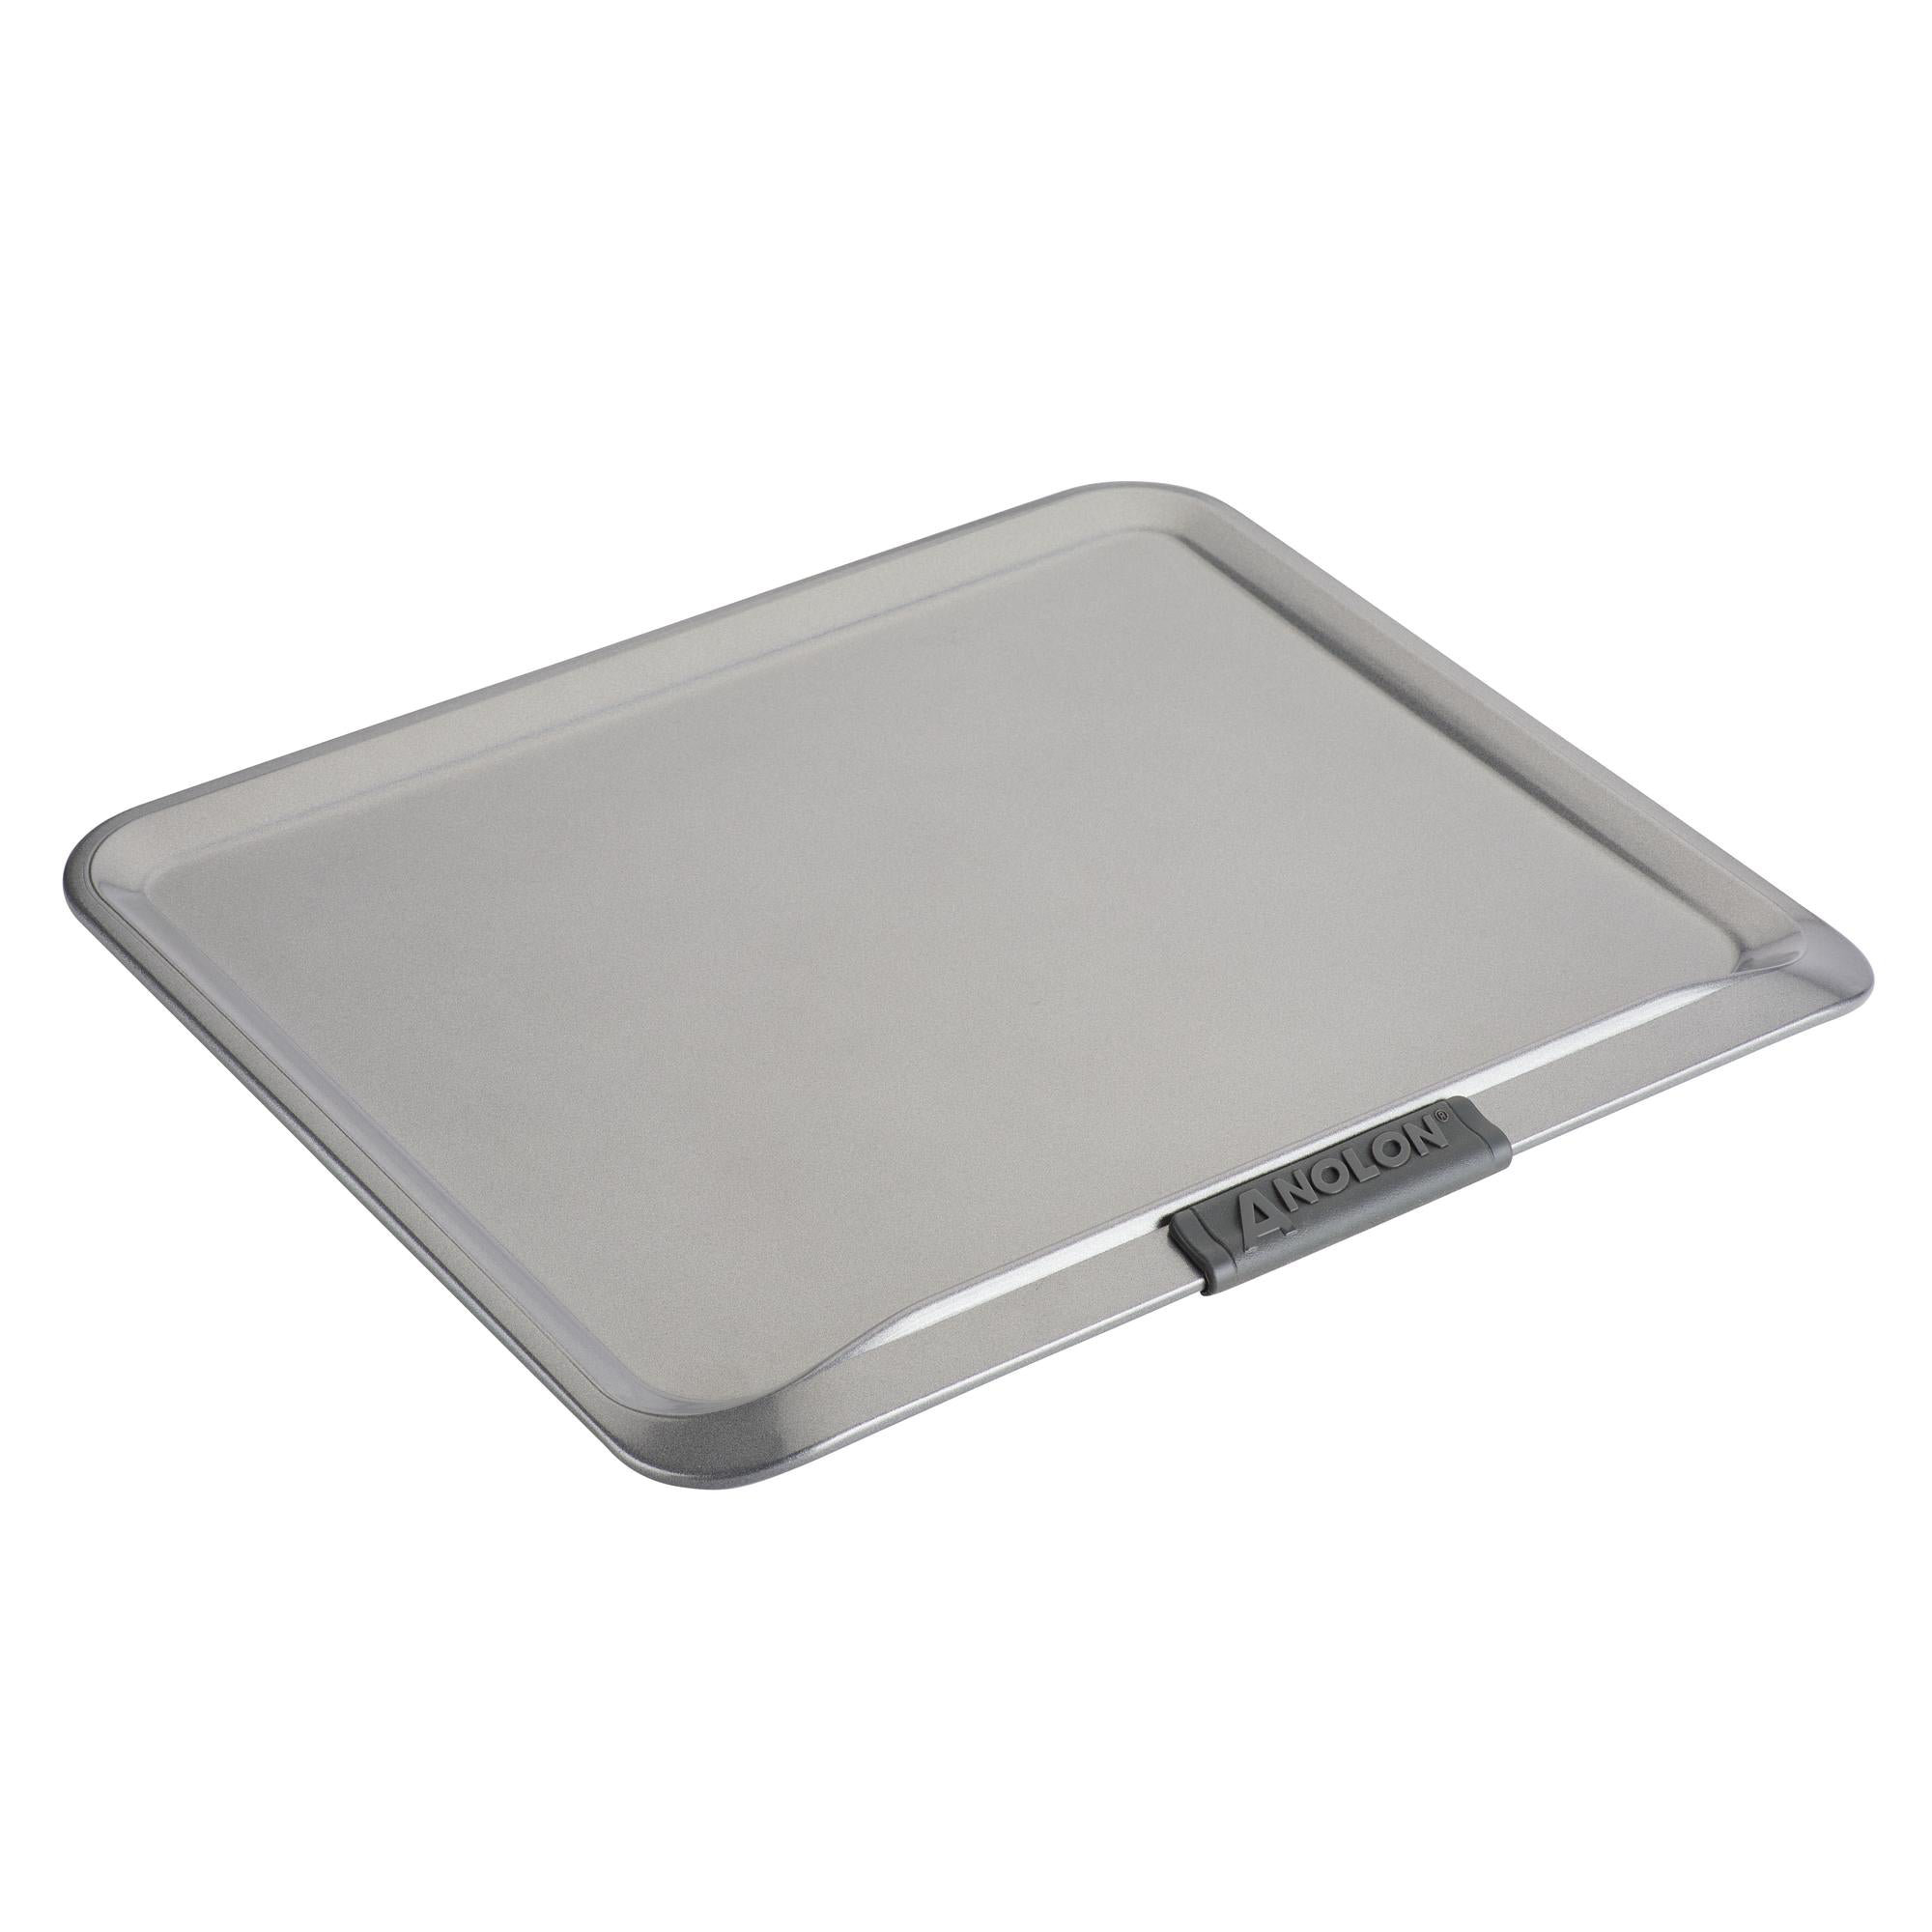 All-Clad 14 x 17 Baking Sheet with Cooling Rack